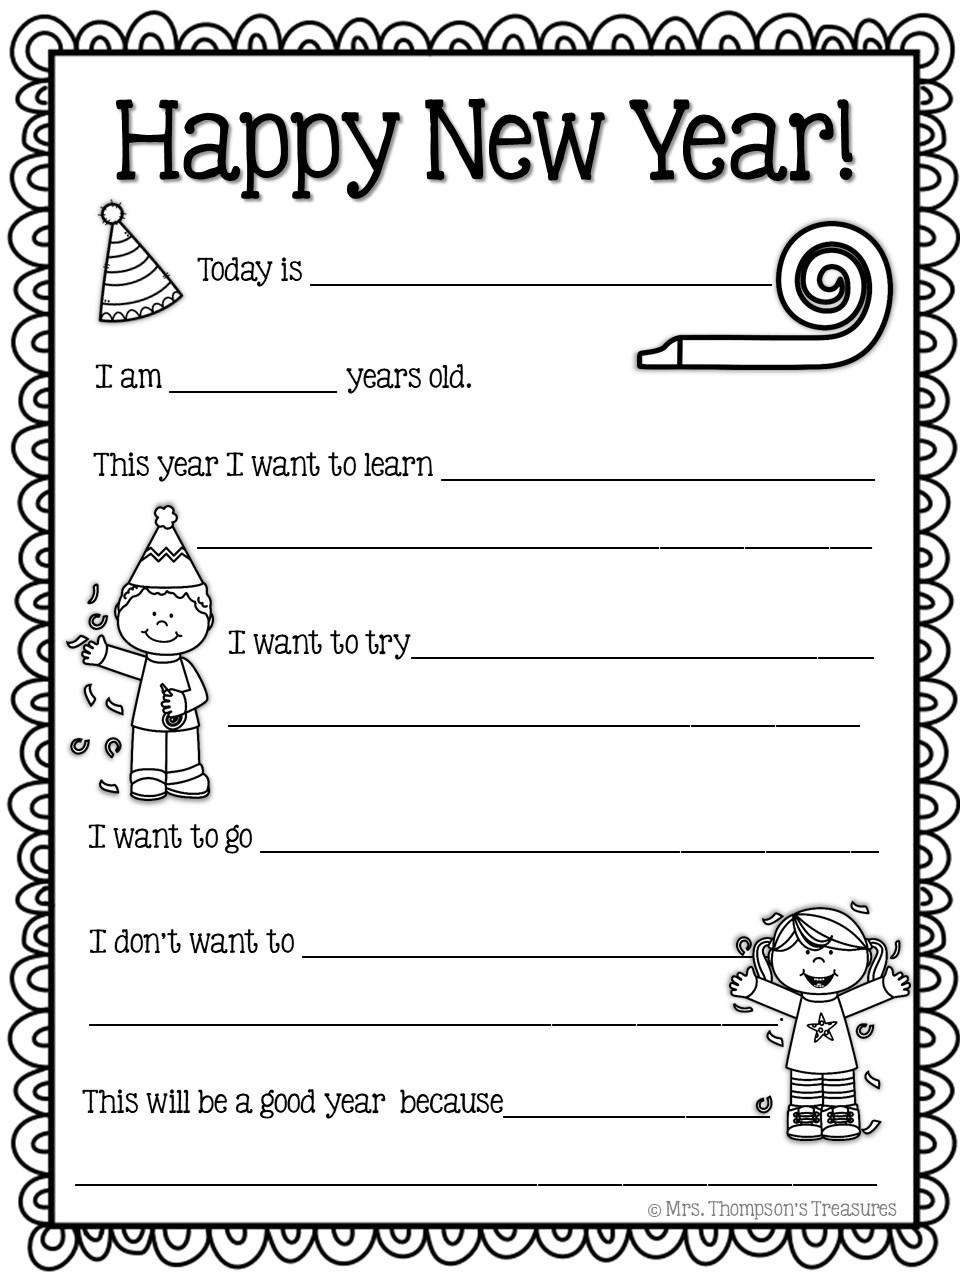 new-year-s-resolutions-projects-printables-refashionably-late